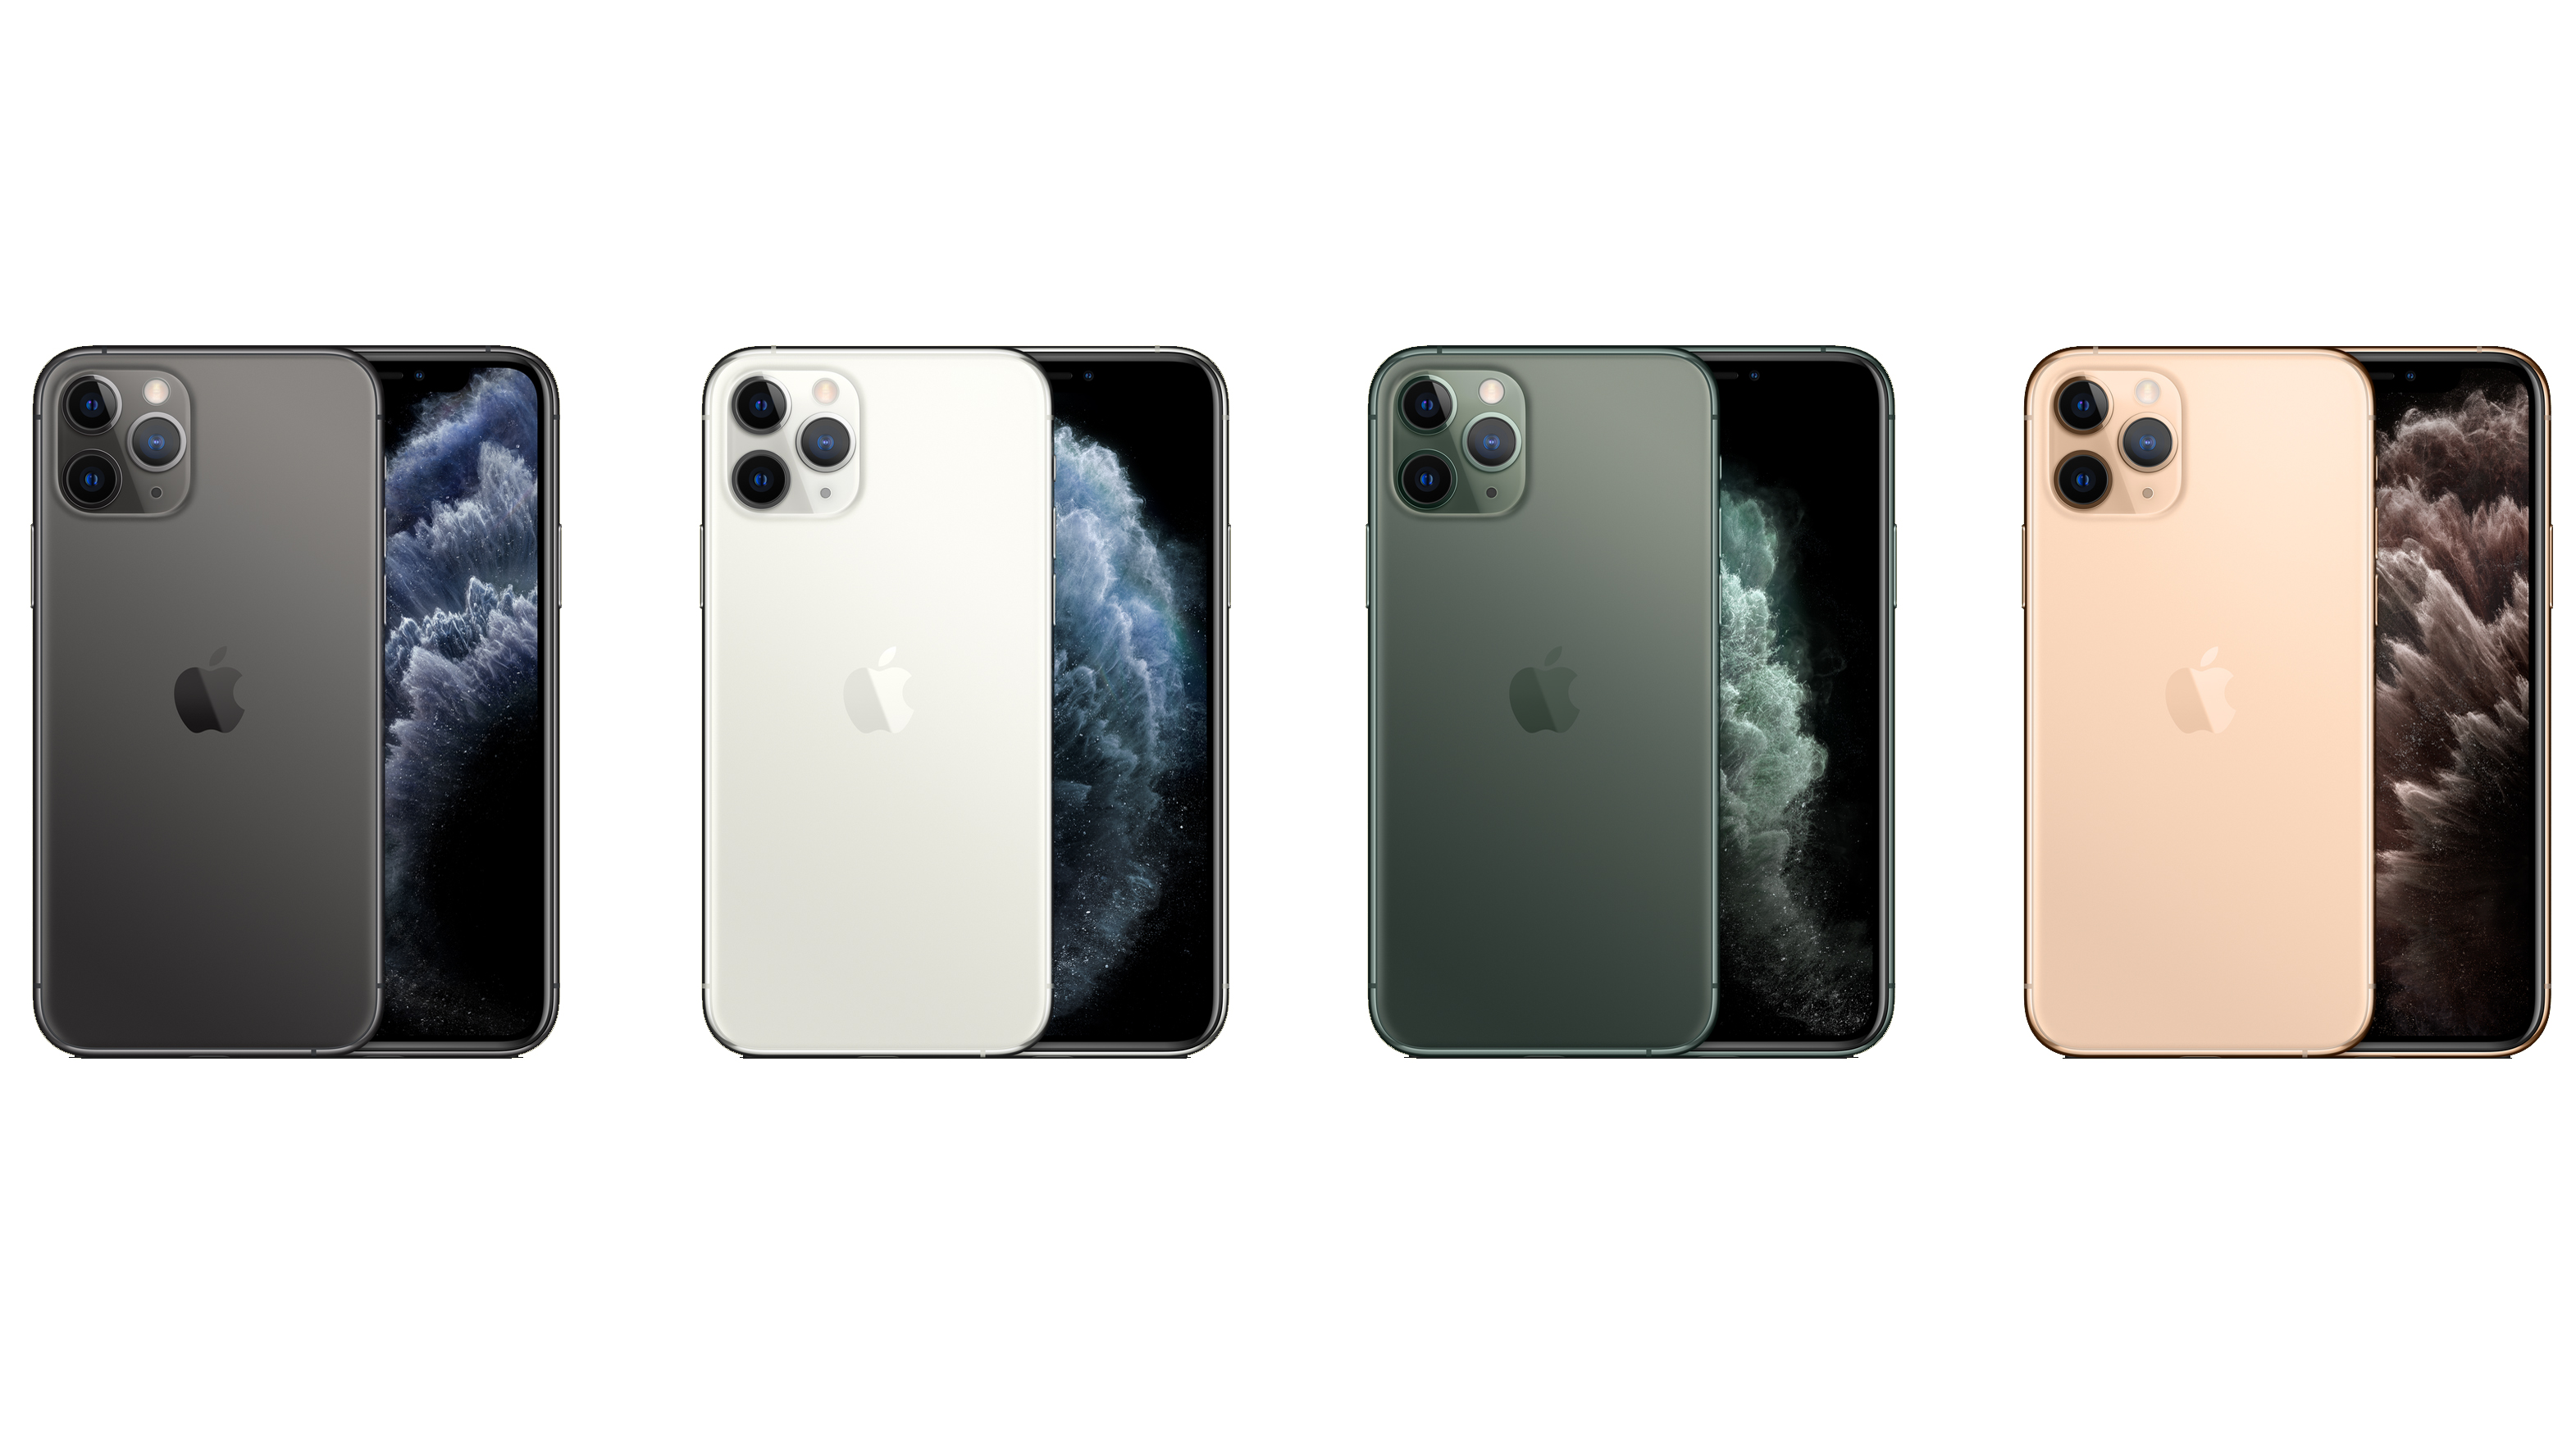 iPhone 11 colors: the new options for the iPhone 11 and 11 Pro - Zain's